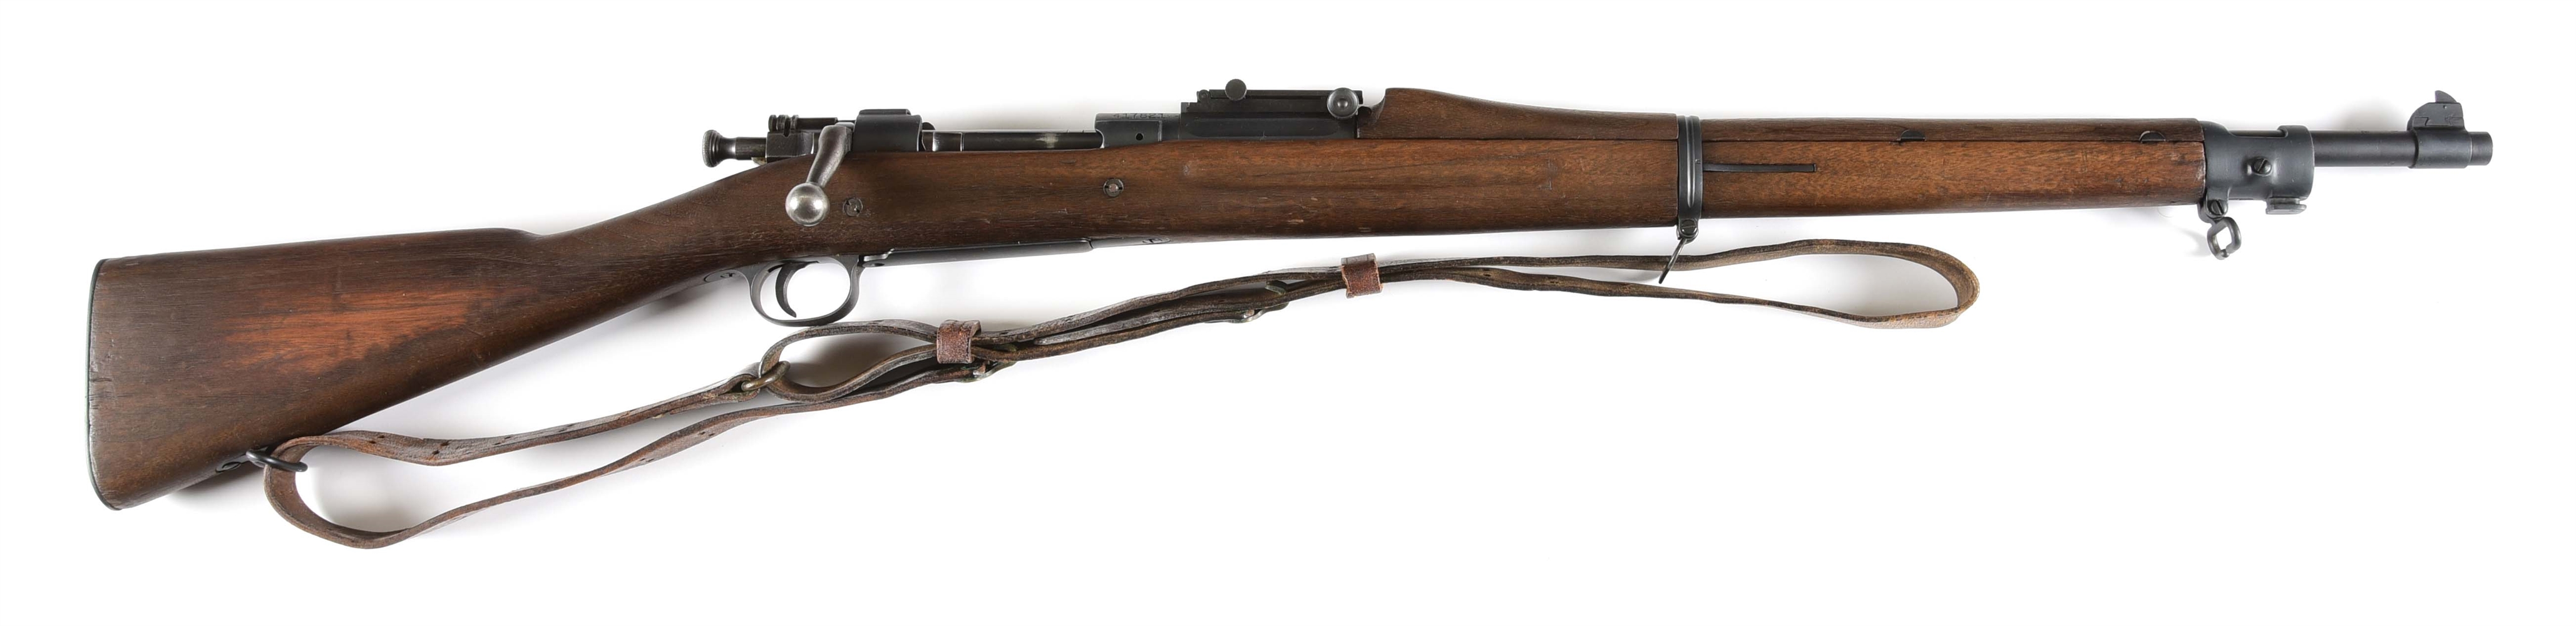 (C) EARLY 1920S PRODUCTION ROCK ISLAND ARMORY MODEL 1903 BOLT ACTION RIFLE.